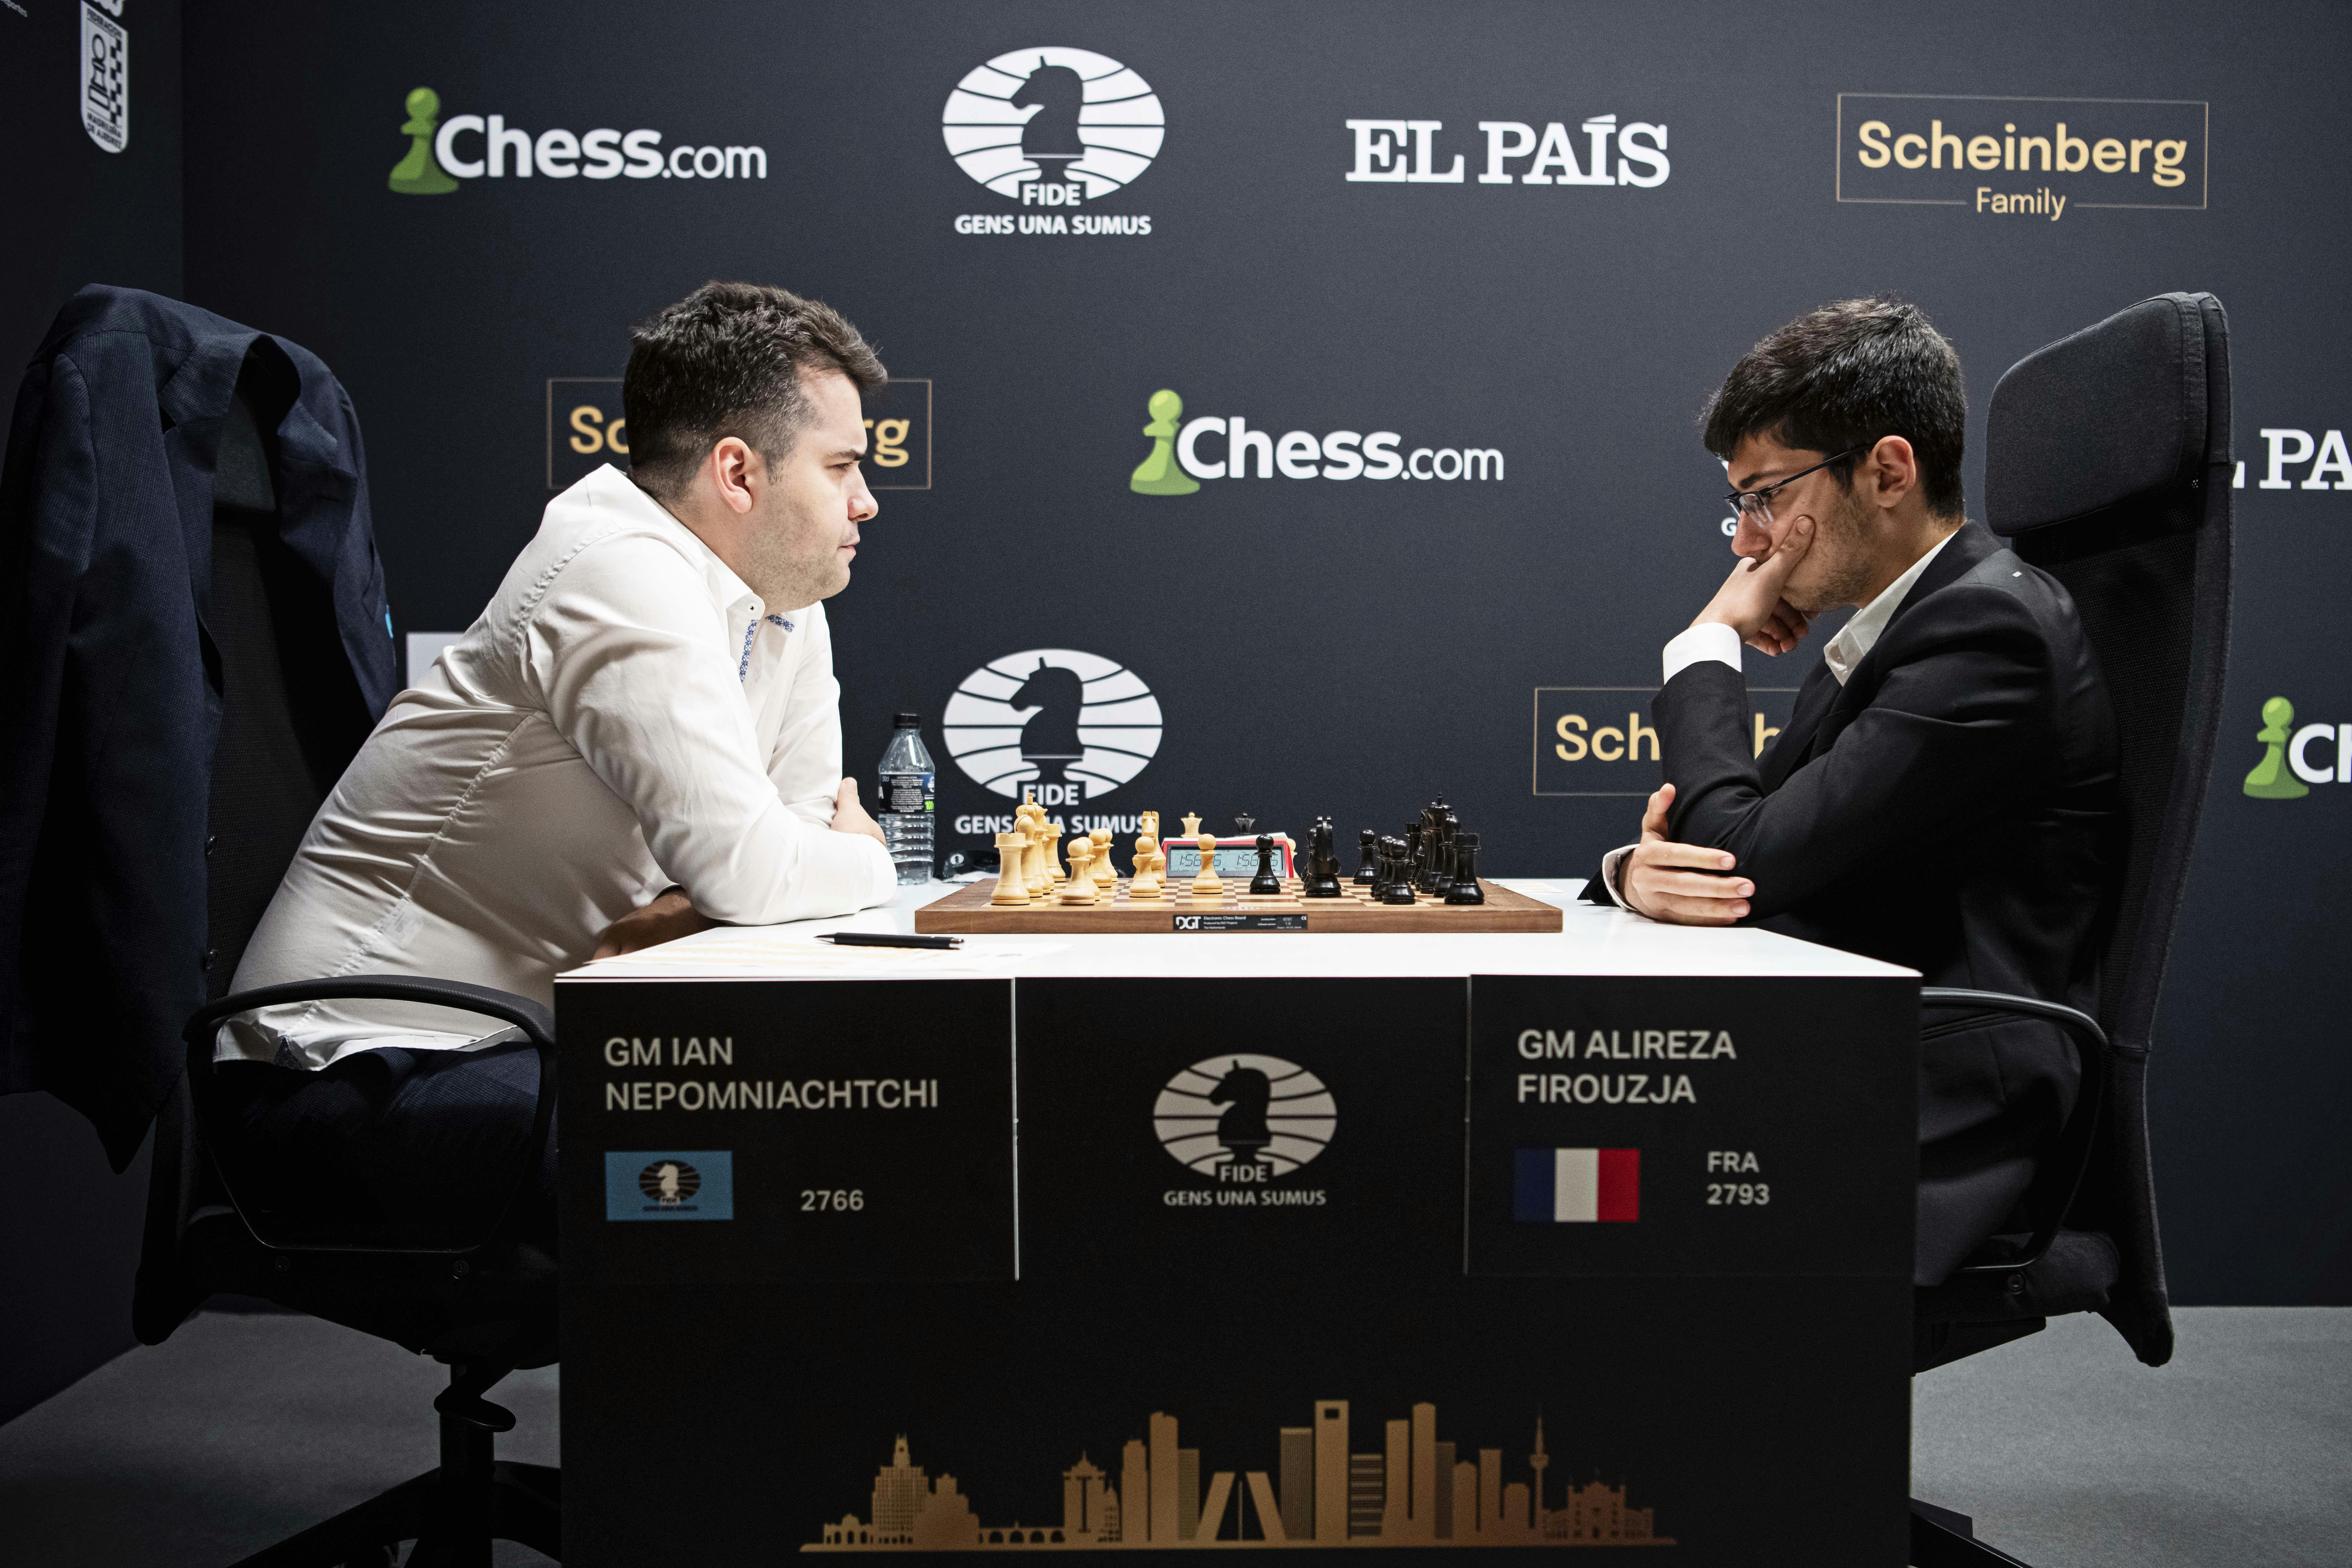 Nepo and Caruana win on Round 7 of the Candidates 2022